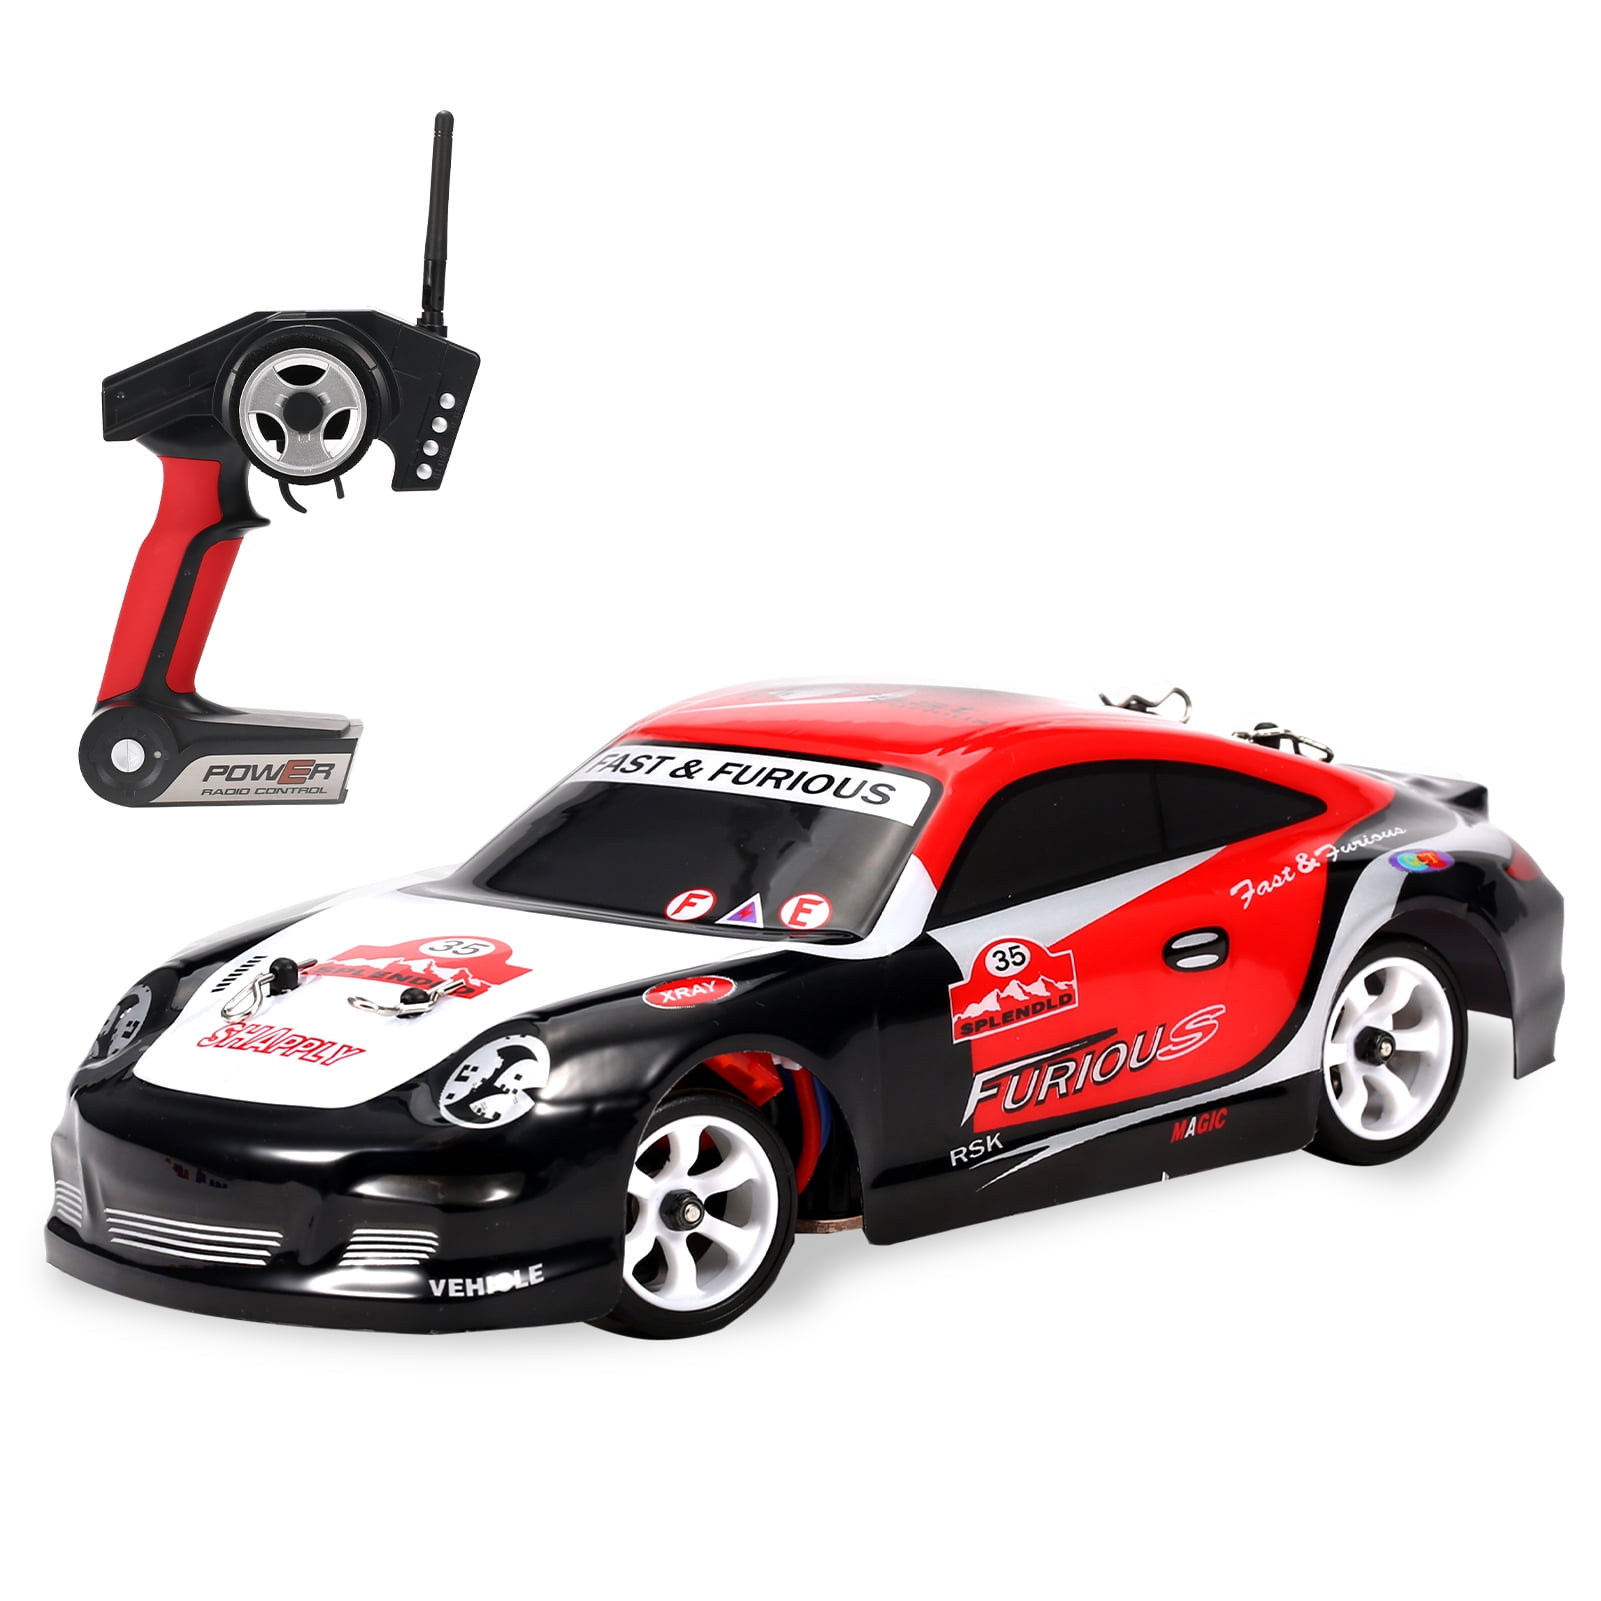 30KM/H High Speed Remote Control Drift Car 4WD RC Racing Car Off-road RTR Truck 